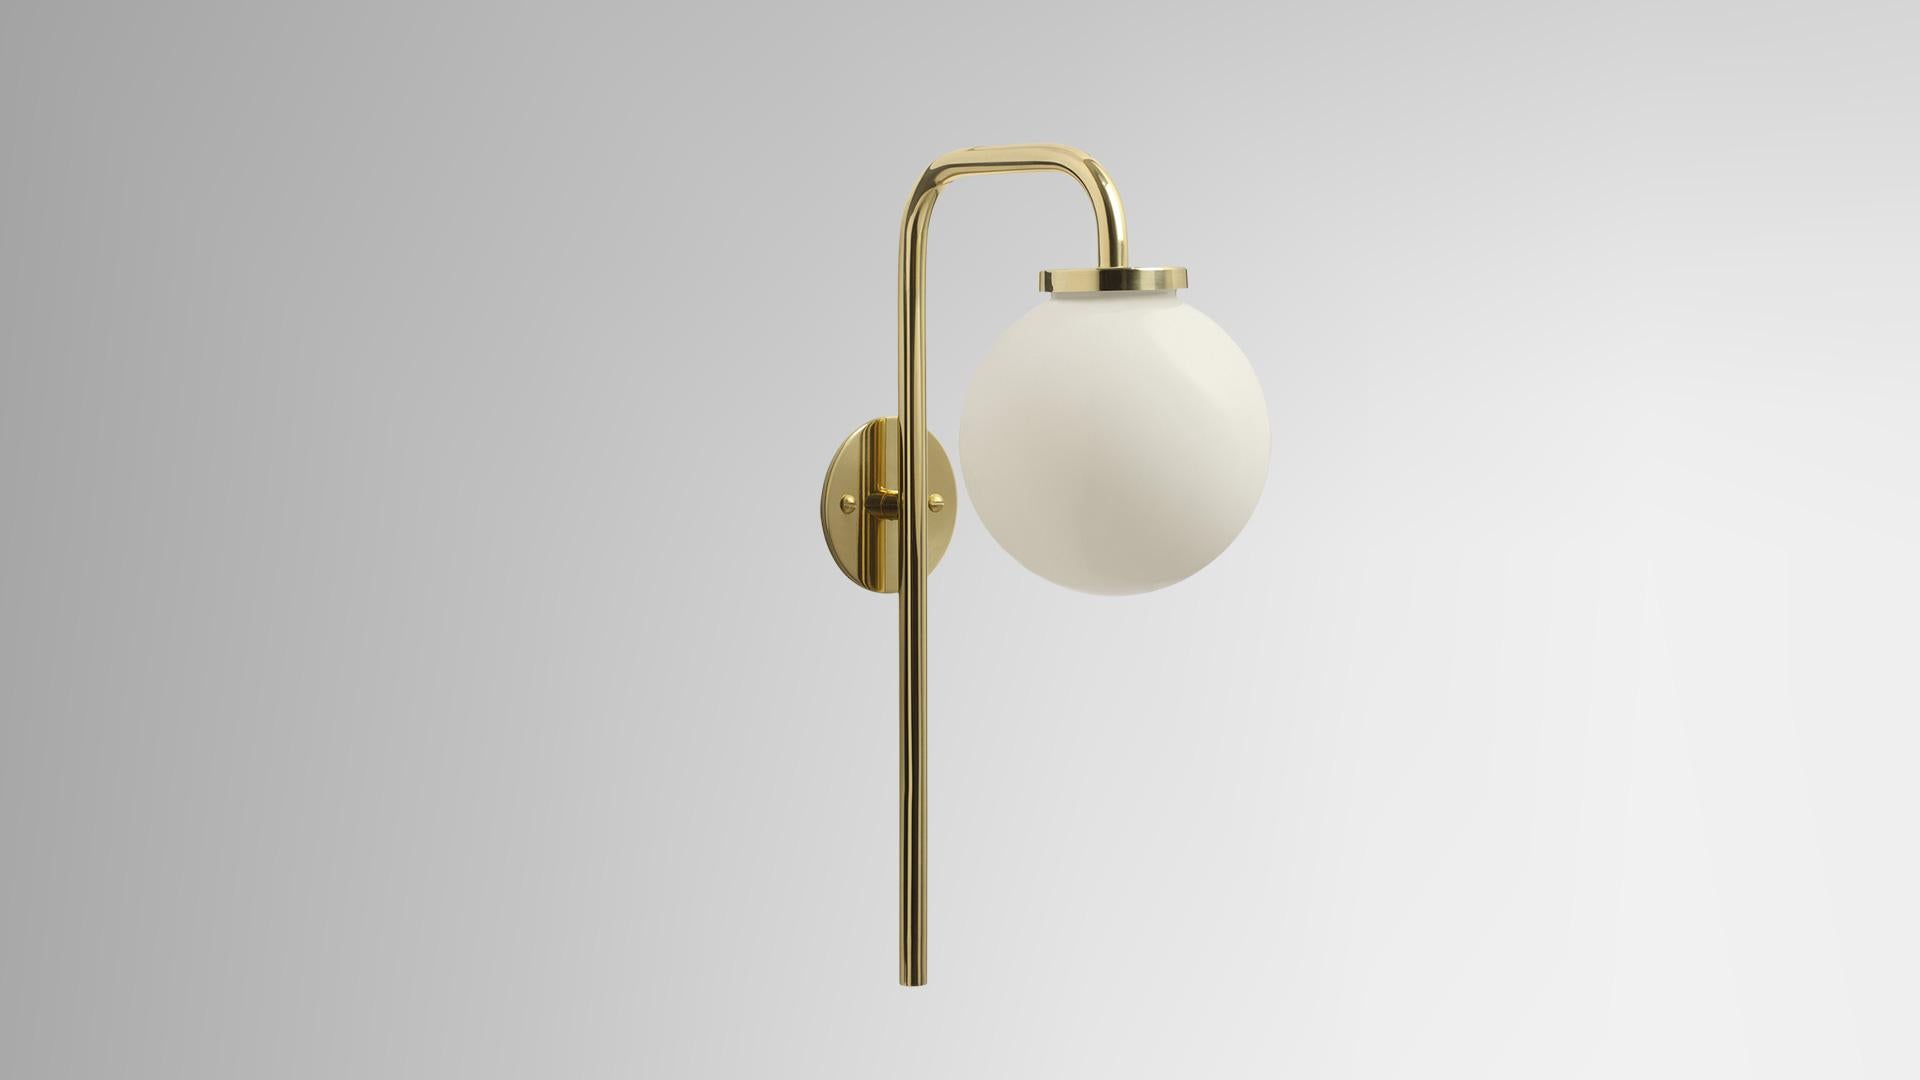 Polished brass opal big bulb wall lamp by CTO Lighting
Materials: Polished brass with opal glass shade
Dimensions: 20 x H 36 cm

All our lamps can be wired according to each country. If sold to the USA it will be wired for the USA for